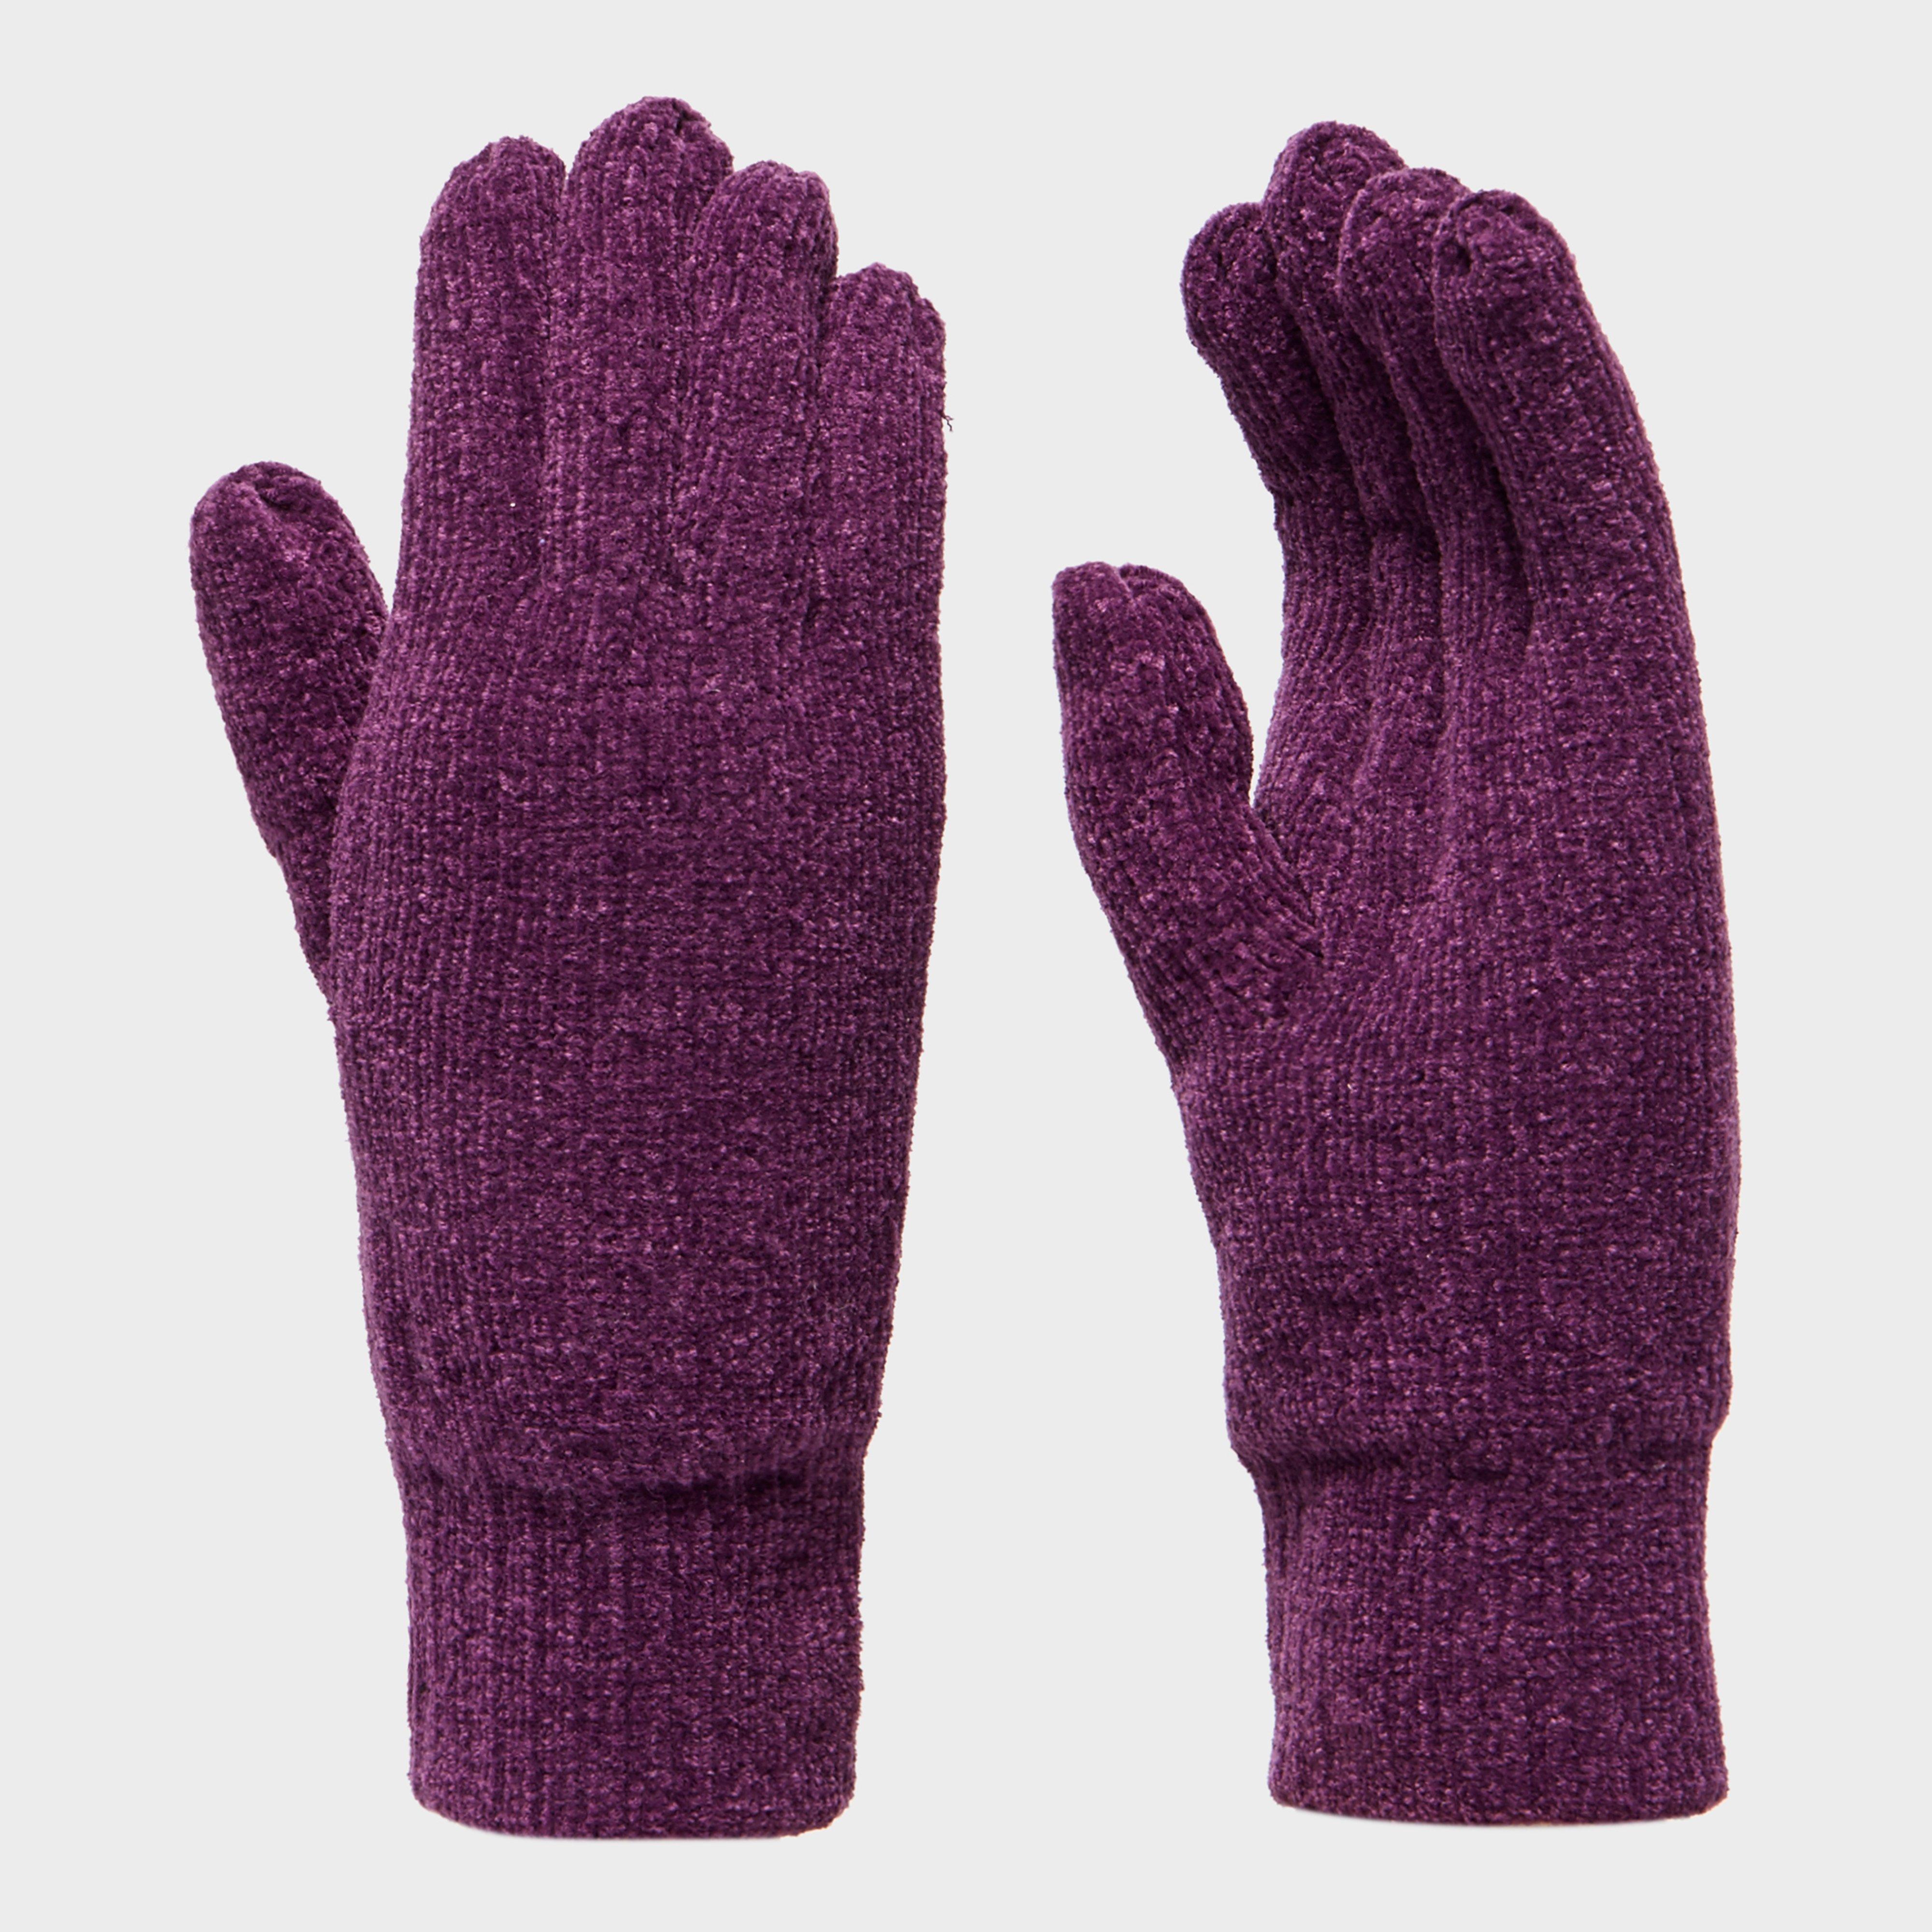 Peter Storm Womens Thinsulate Chennile Gloves  Purple